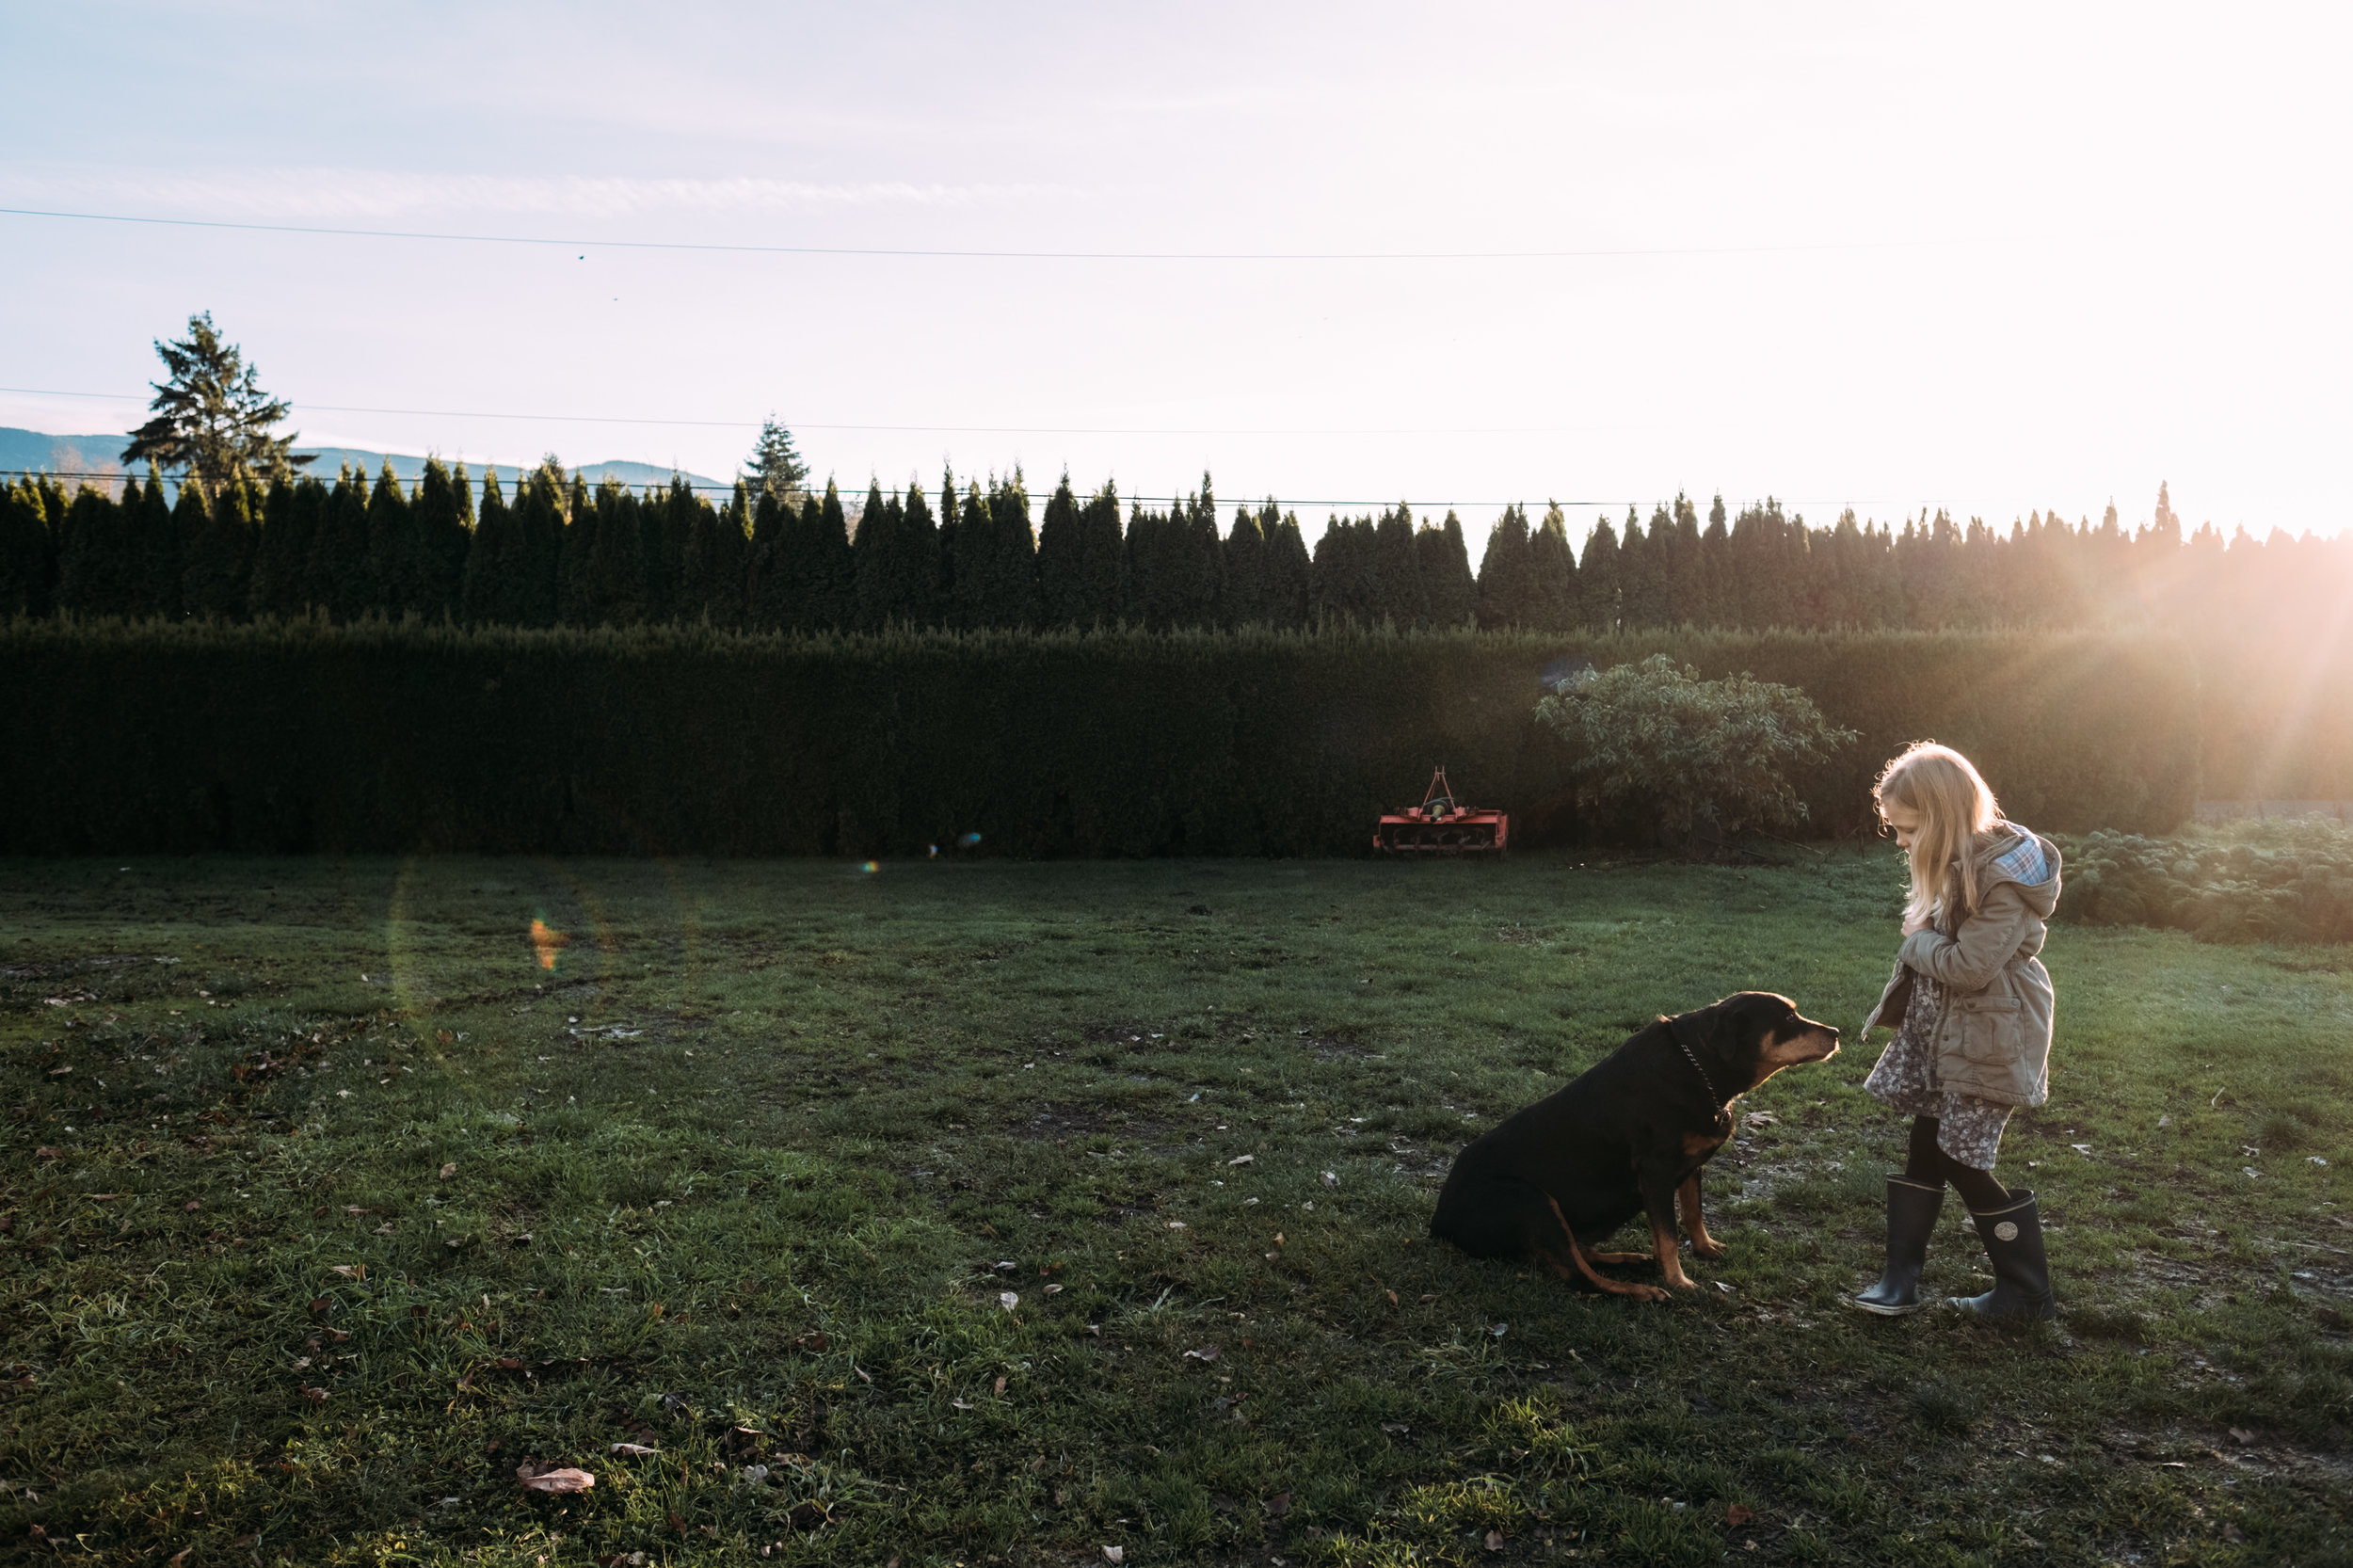 girl with dog on grass at sunset in chilliwack fraser valley canada photographer